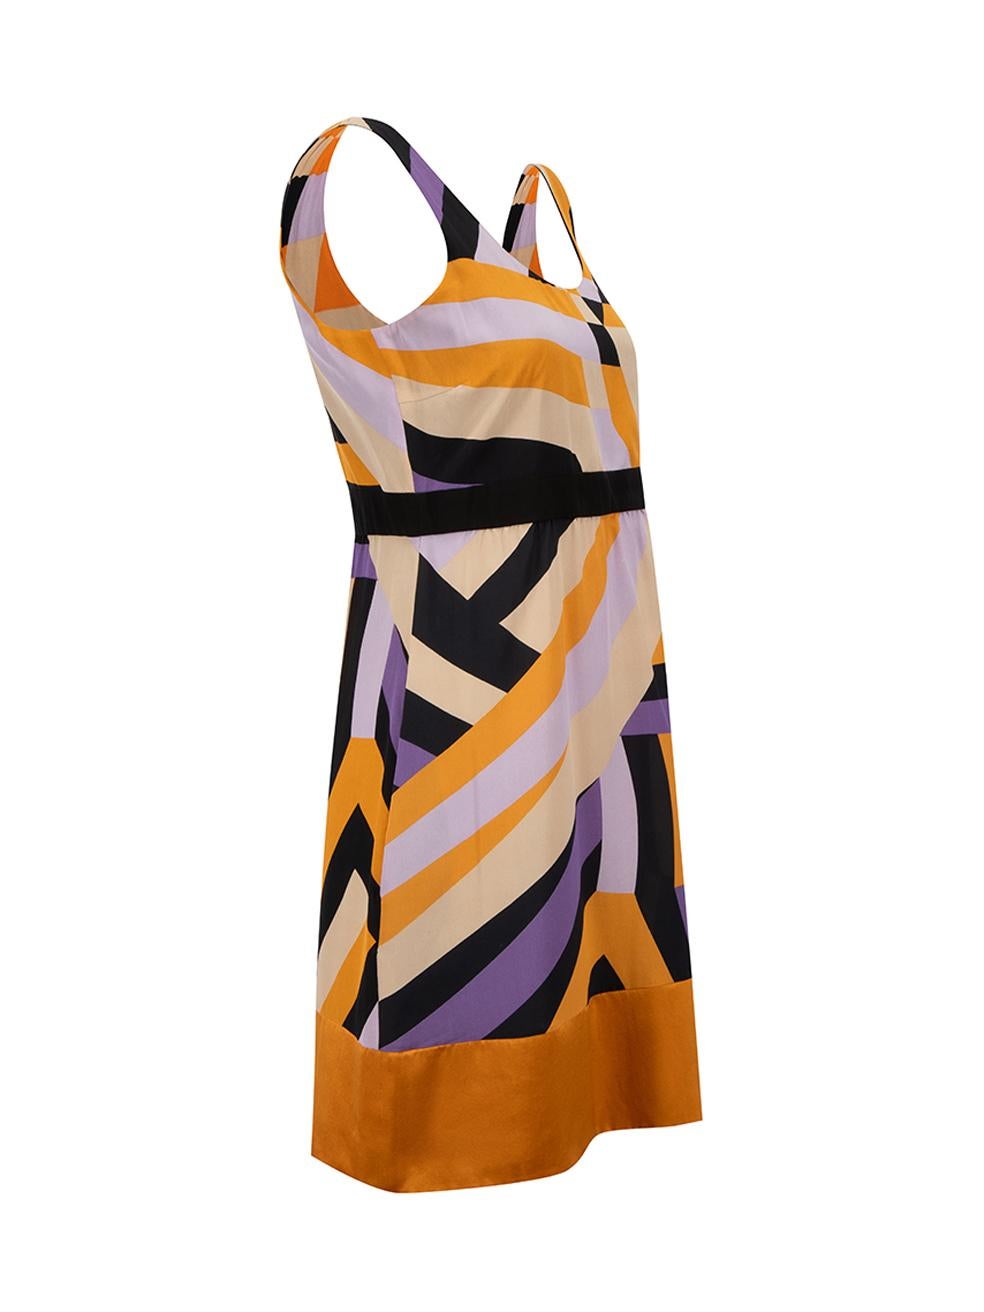 CONDITION is Very good. Minimal wear to dress is evident. Minimal wear to the front-left of the neckline and the centre-front with a pull to the weave and a light discoloured mark to the front neckline lining on this used Missoni designer resale